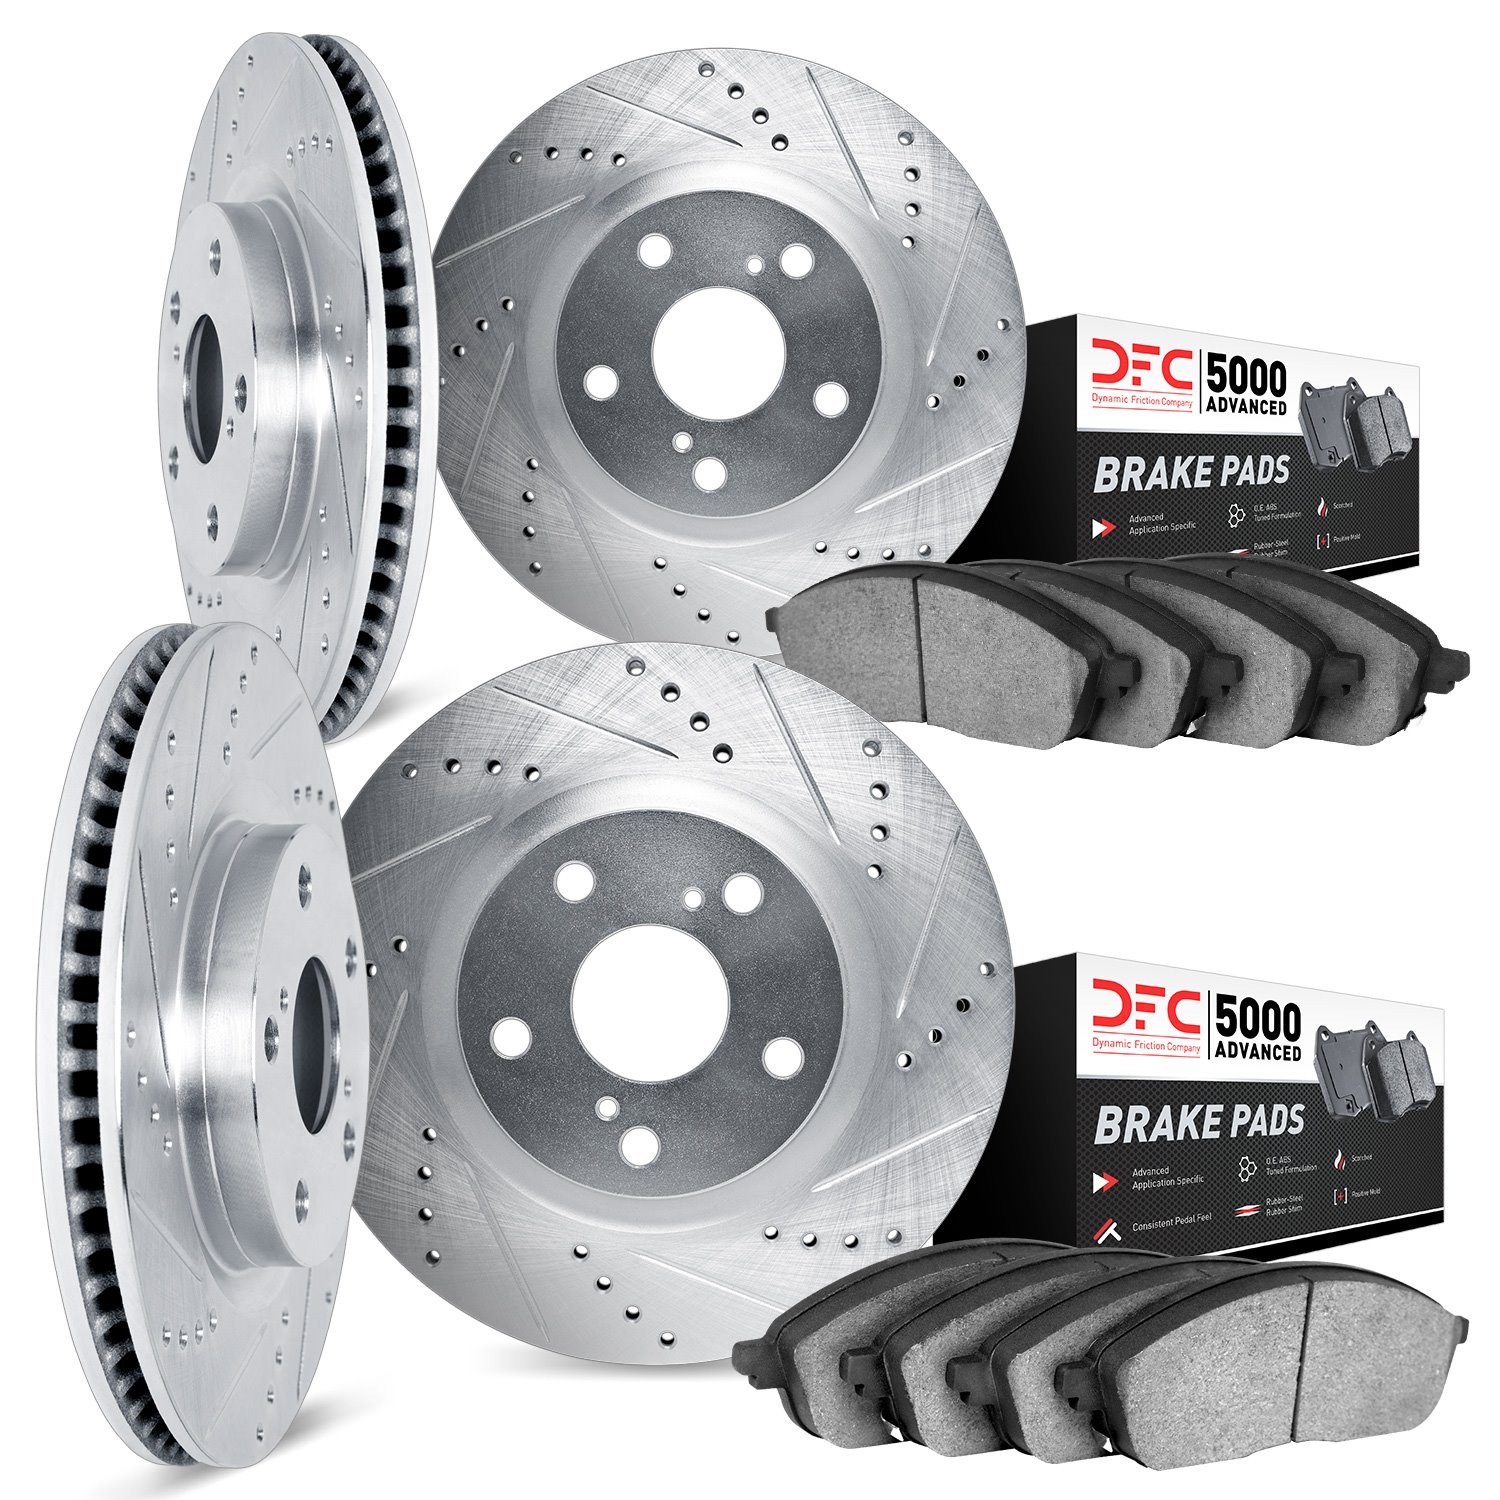 7504-73011 Drilled/Slotted Brake Rotors w/5000 Advanced Brake Pads Kit [Silver], 2018-2020 Audi/Volkswagen, Position: Front and